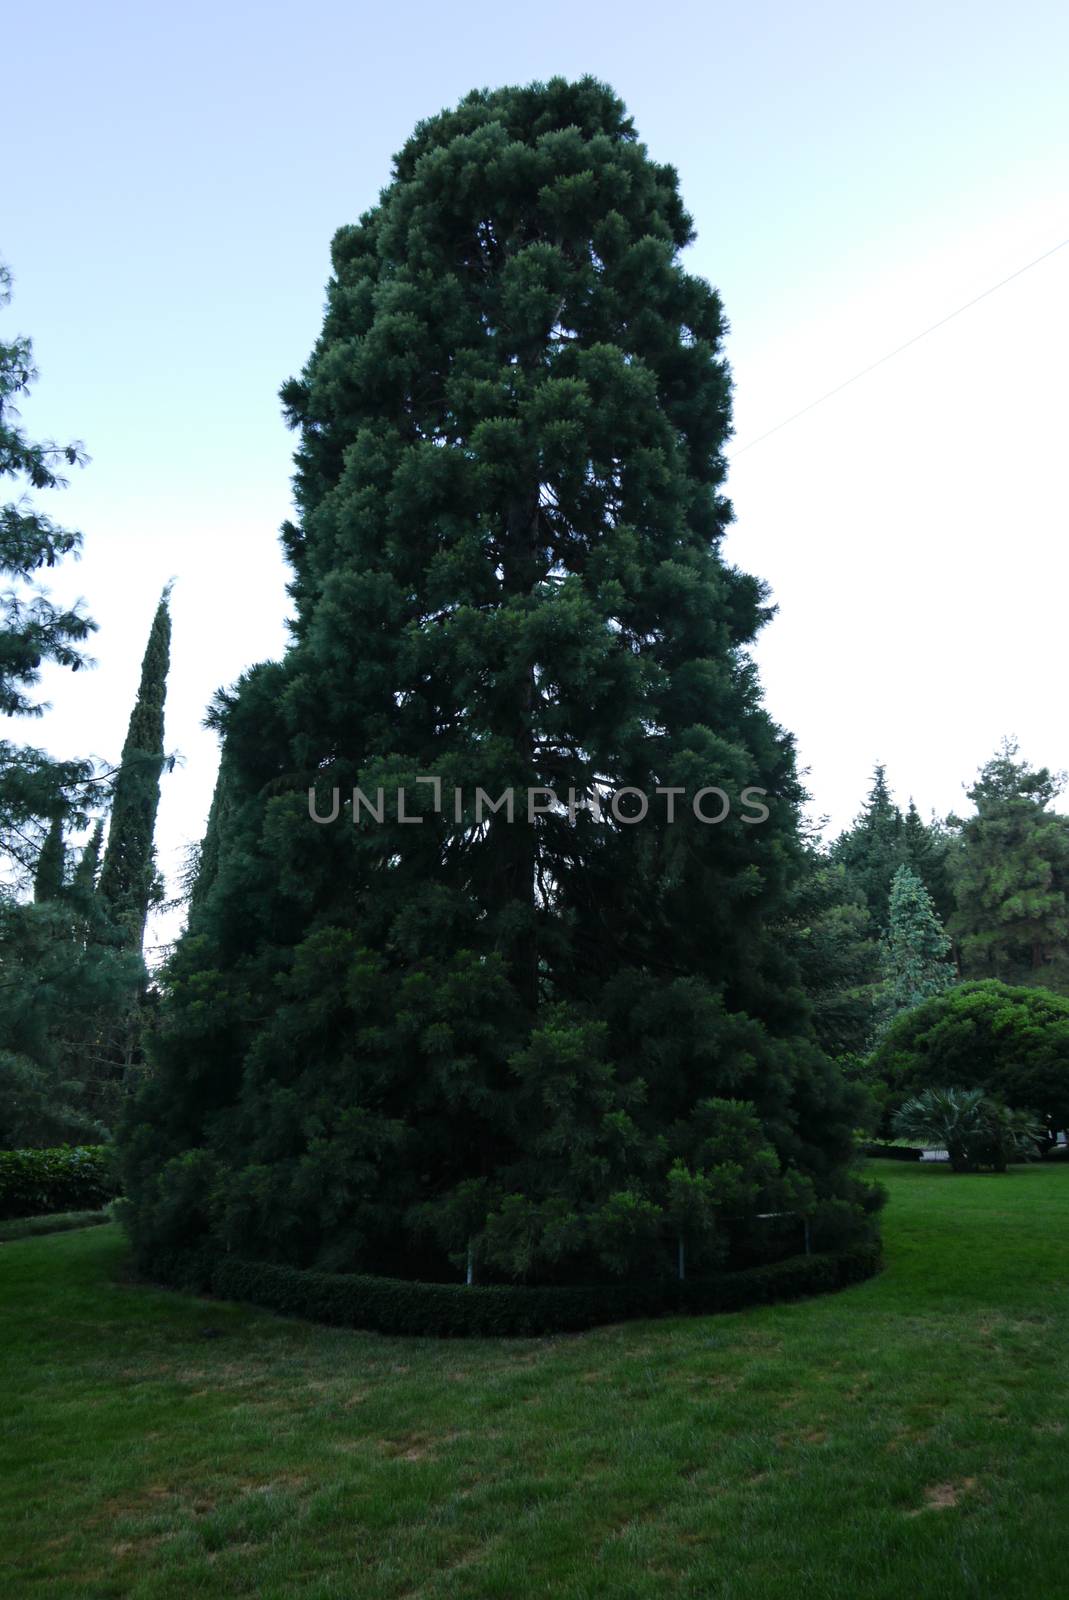 Lush green spruce growing on a well-groomed lawn in the park. A beautiful tree is one of the symbols of the new year.